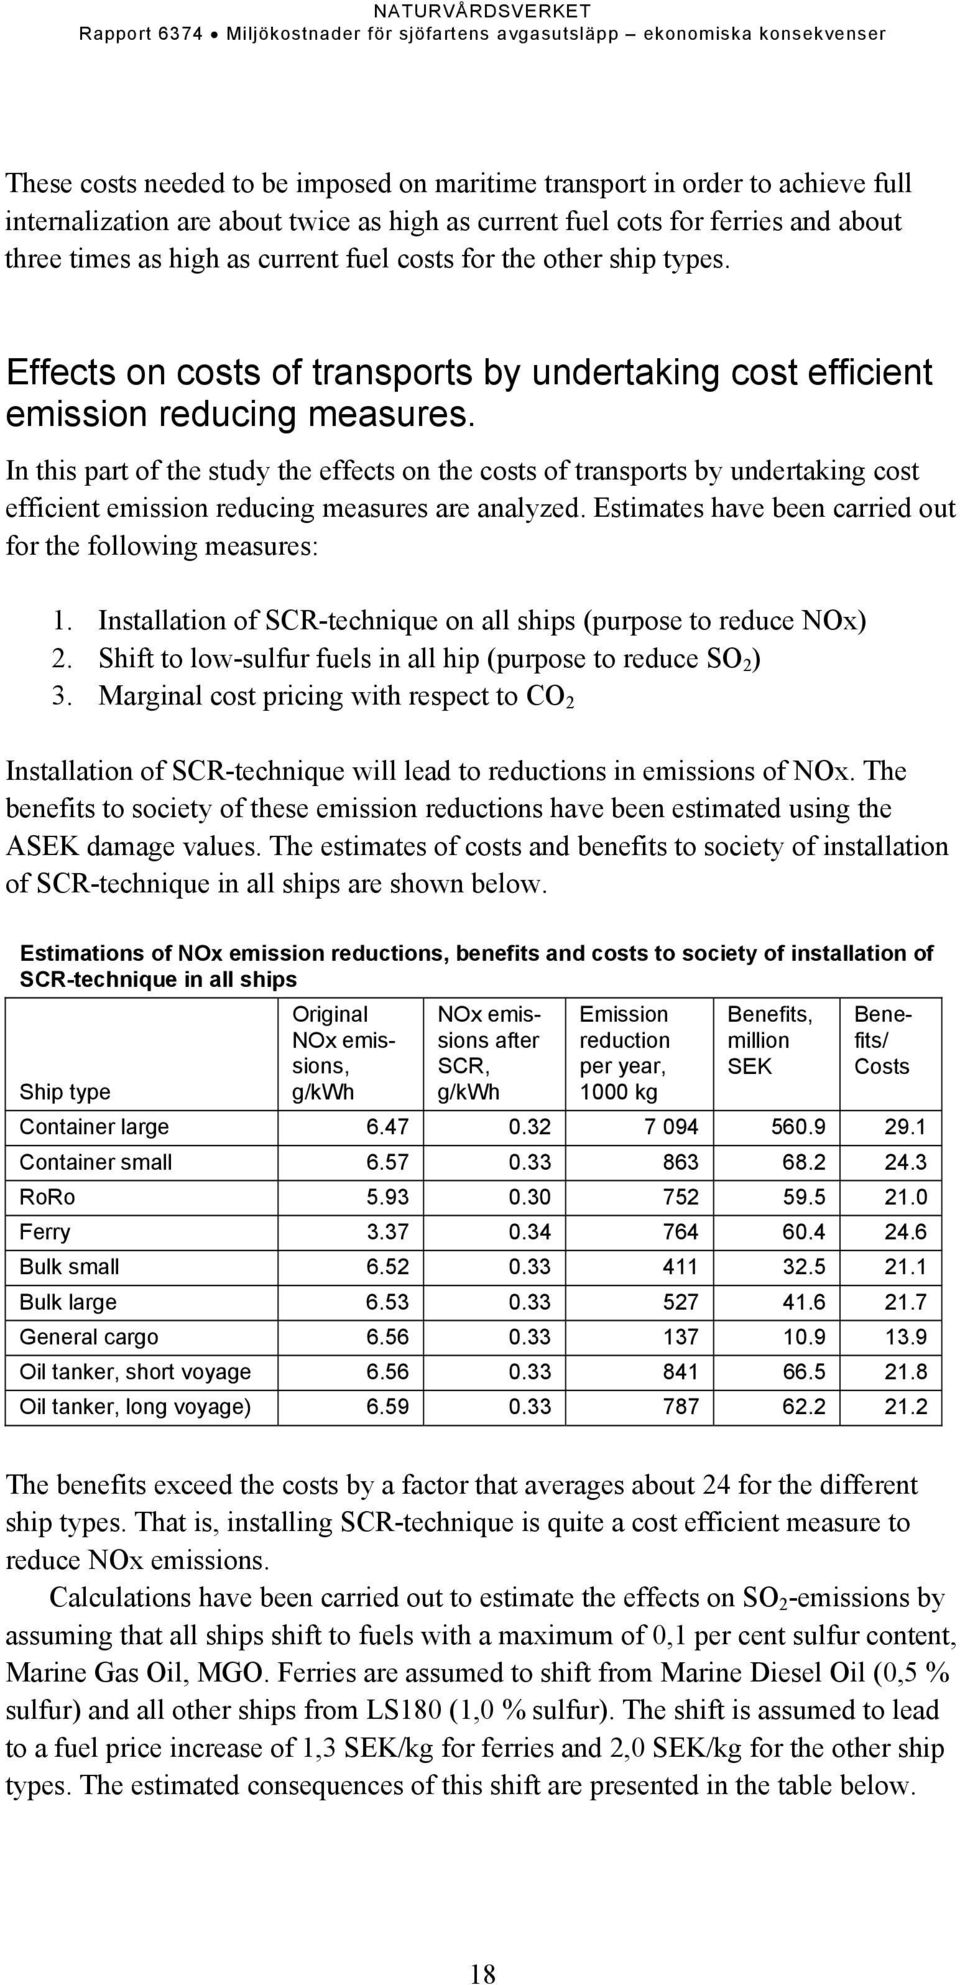 In this part of the study the effects on the costs of transports by undertaking cost efficient emission reducing measures are analyzed. Estimates have been carried out for the following measures: 1.